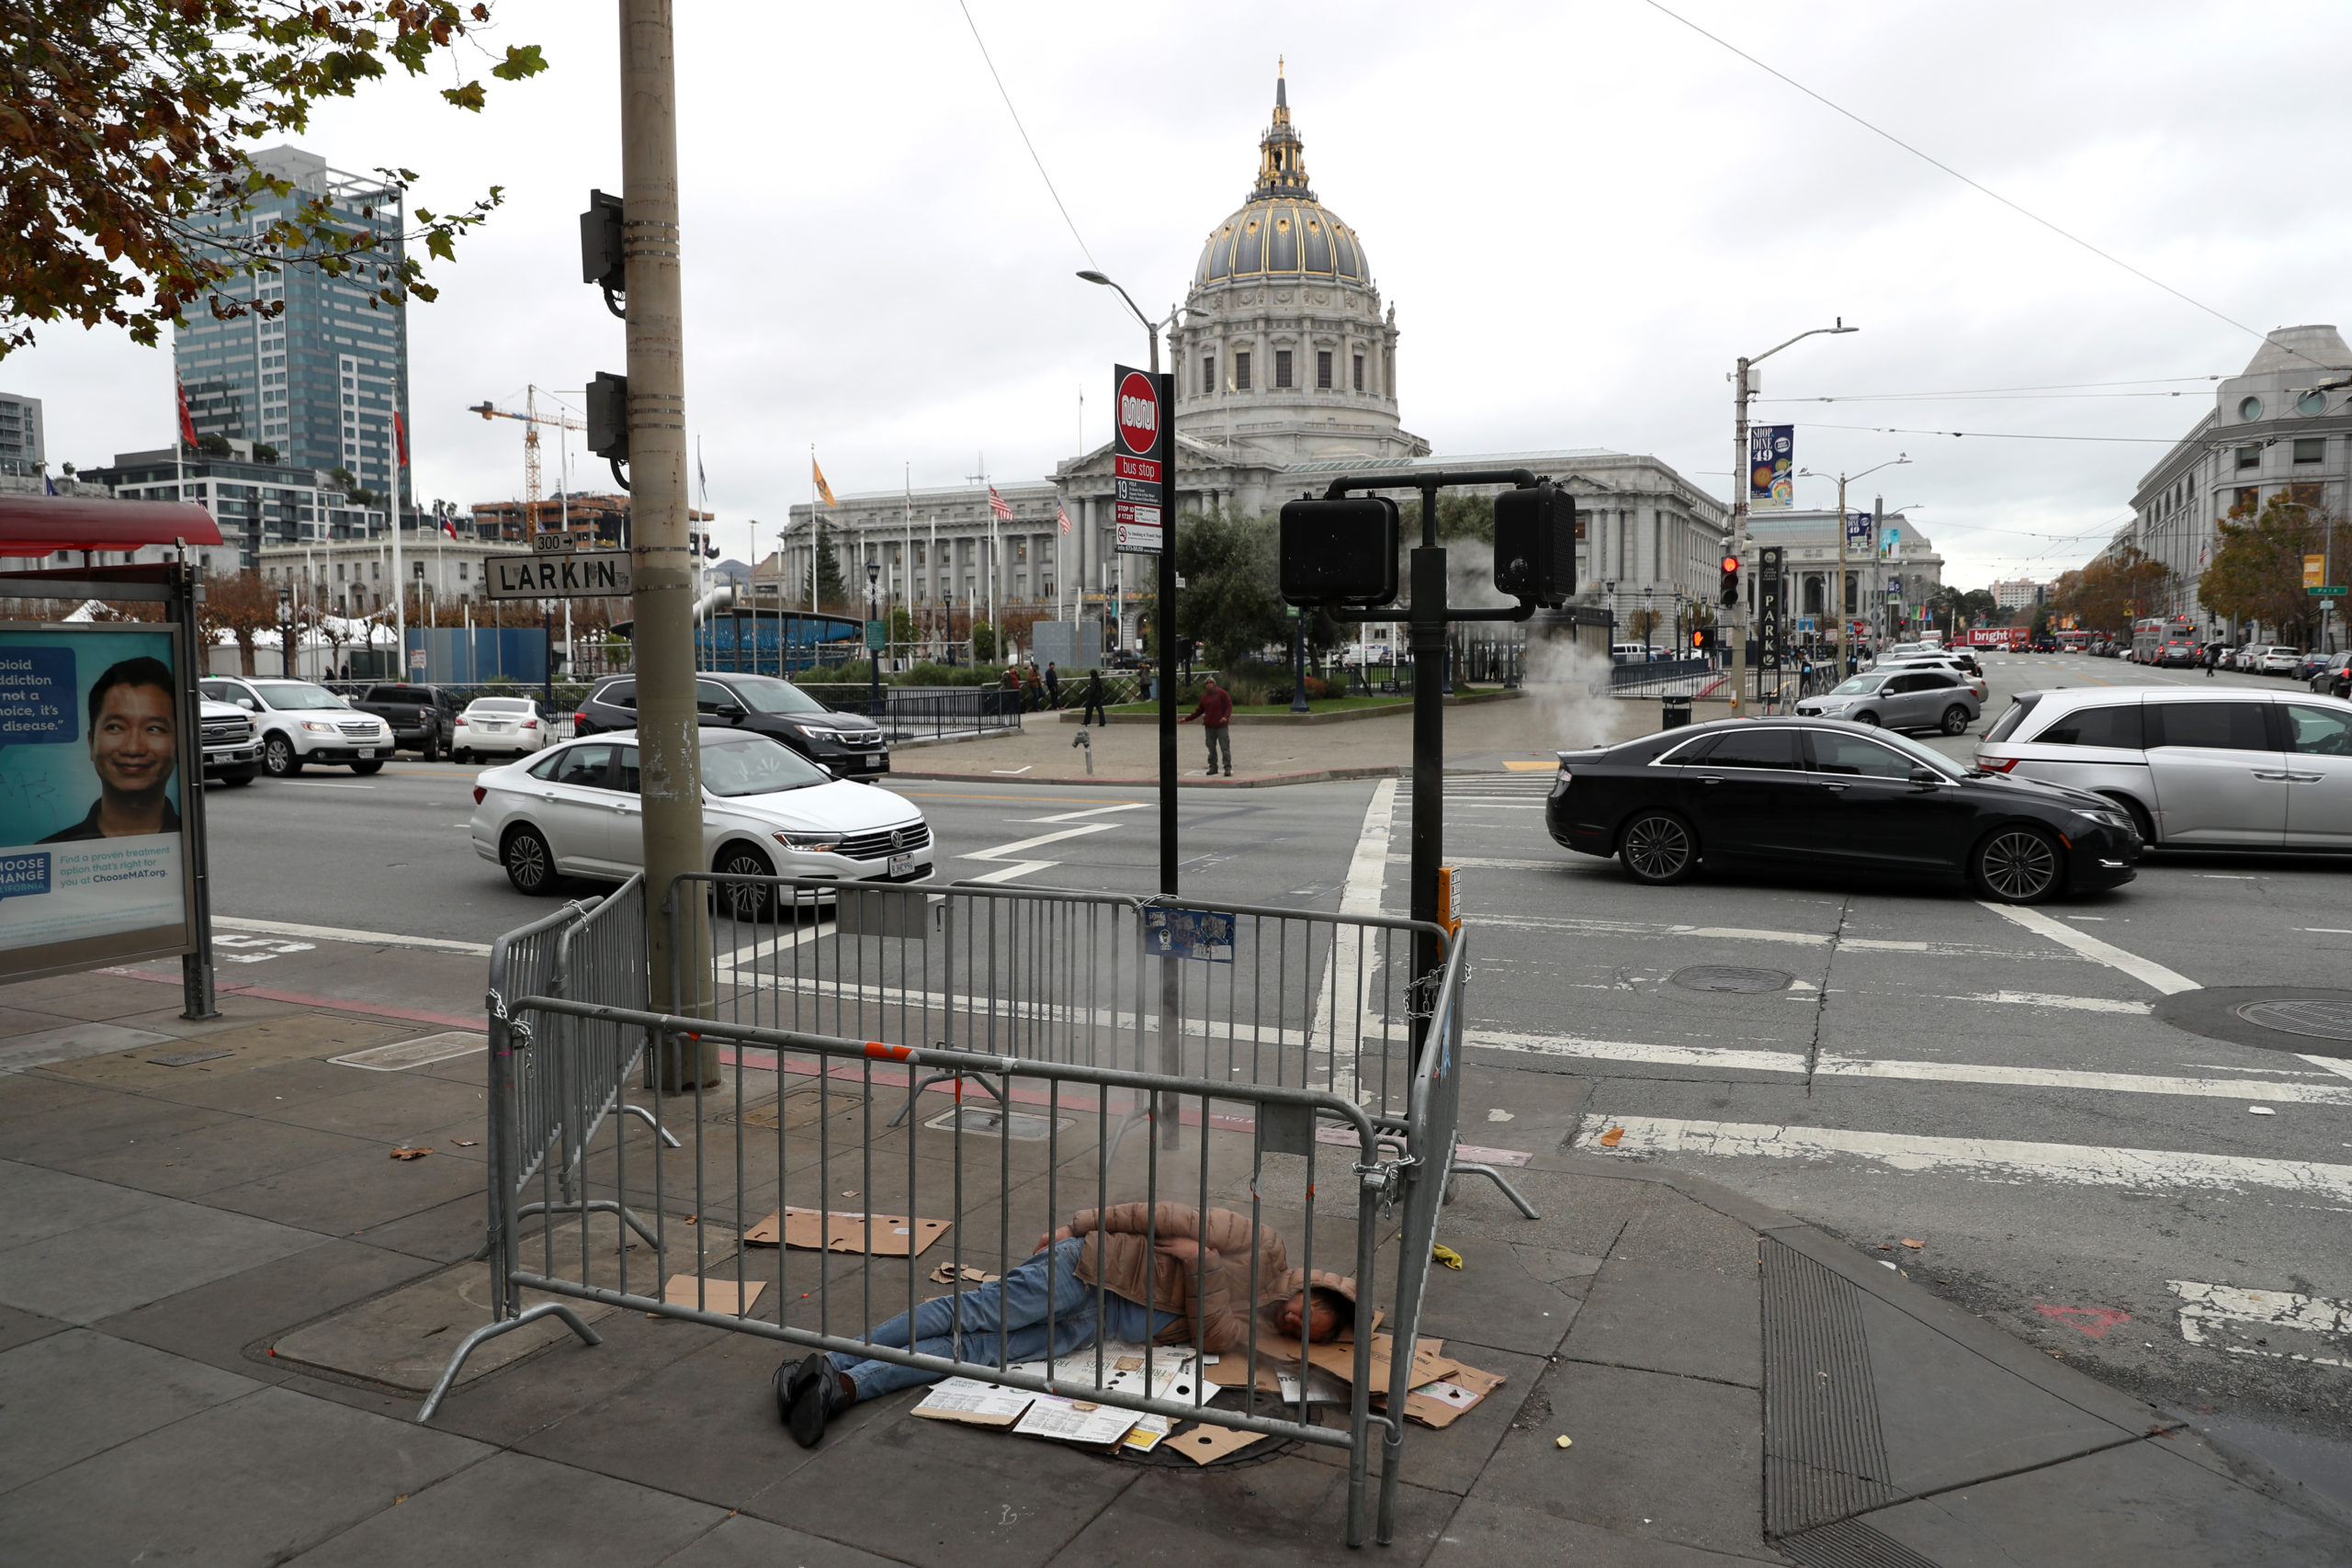 SAN FRANCISCO, CALIFORNIA - DECEMBER 05: A homeless man sleeps on the sidewalk near San Francisco City Hall on December 05, 2019 in San Francisco, California. California Gov. Gavin Newsom announced plans to release $650 million in emergency aid that will allocated to California cities and counties in an effort to combat the state's homelessness crisis. (Photo by Justin Sullivan/Getty Images)